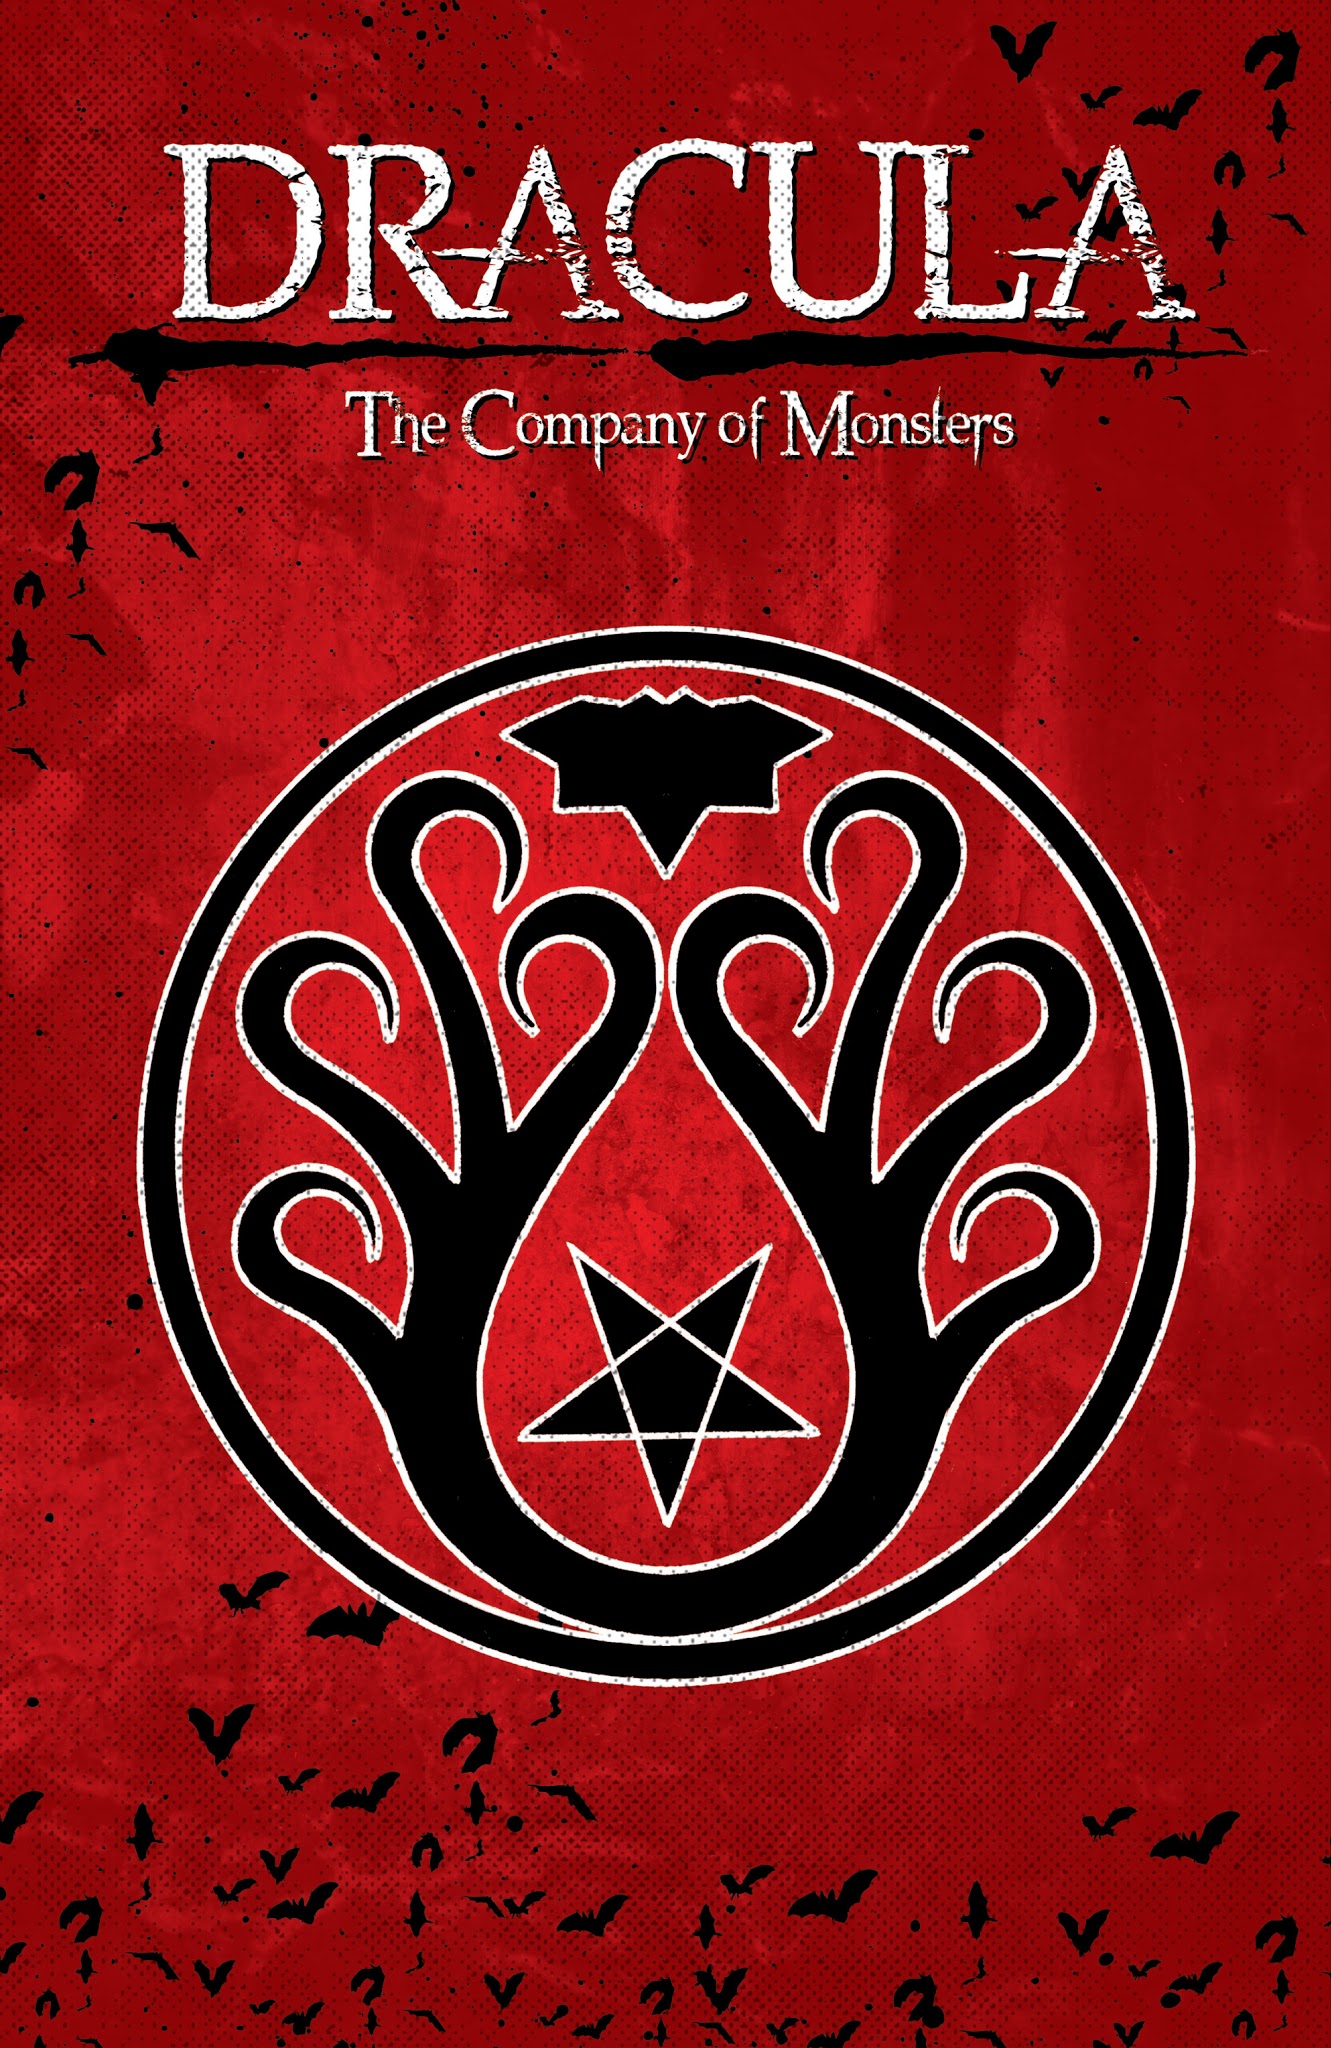 Read online Dracula: The Company of Monsters comic -  Issue # TPB 3 - 2